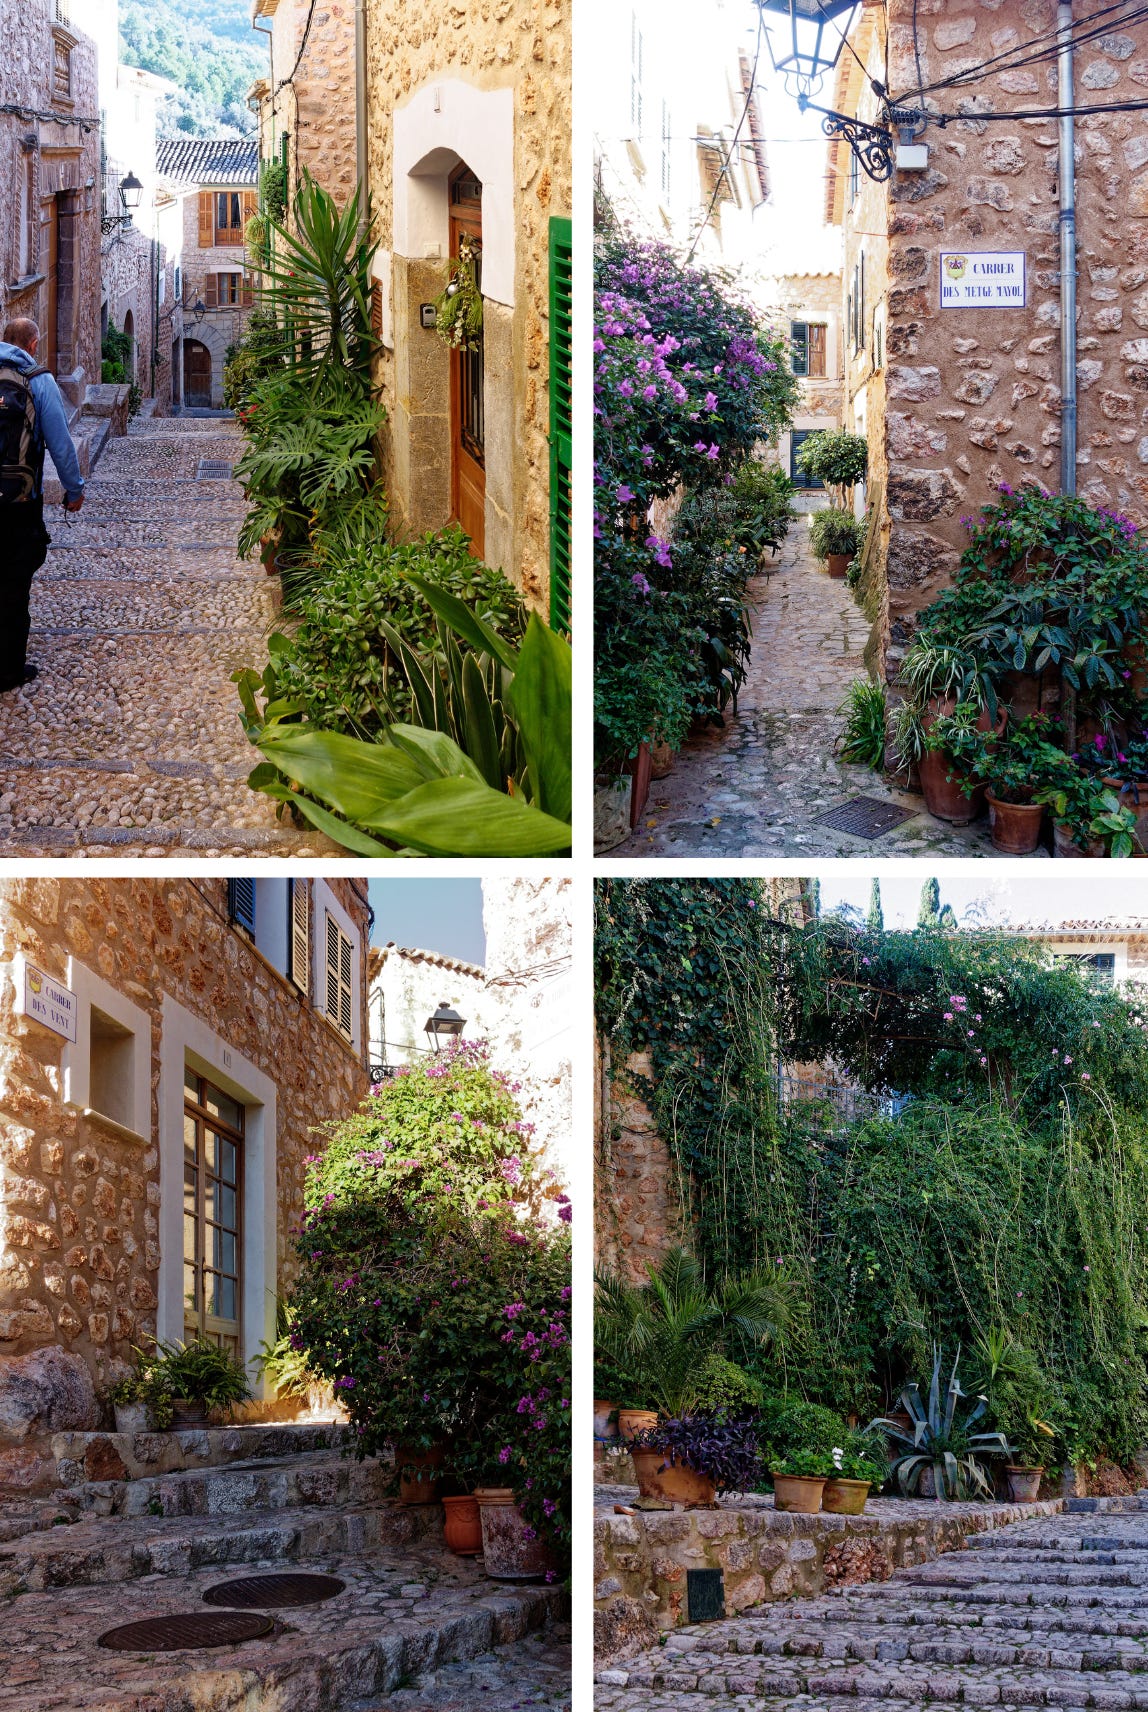 Four views of stone streets, houses and flowers in Fornalutx